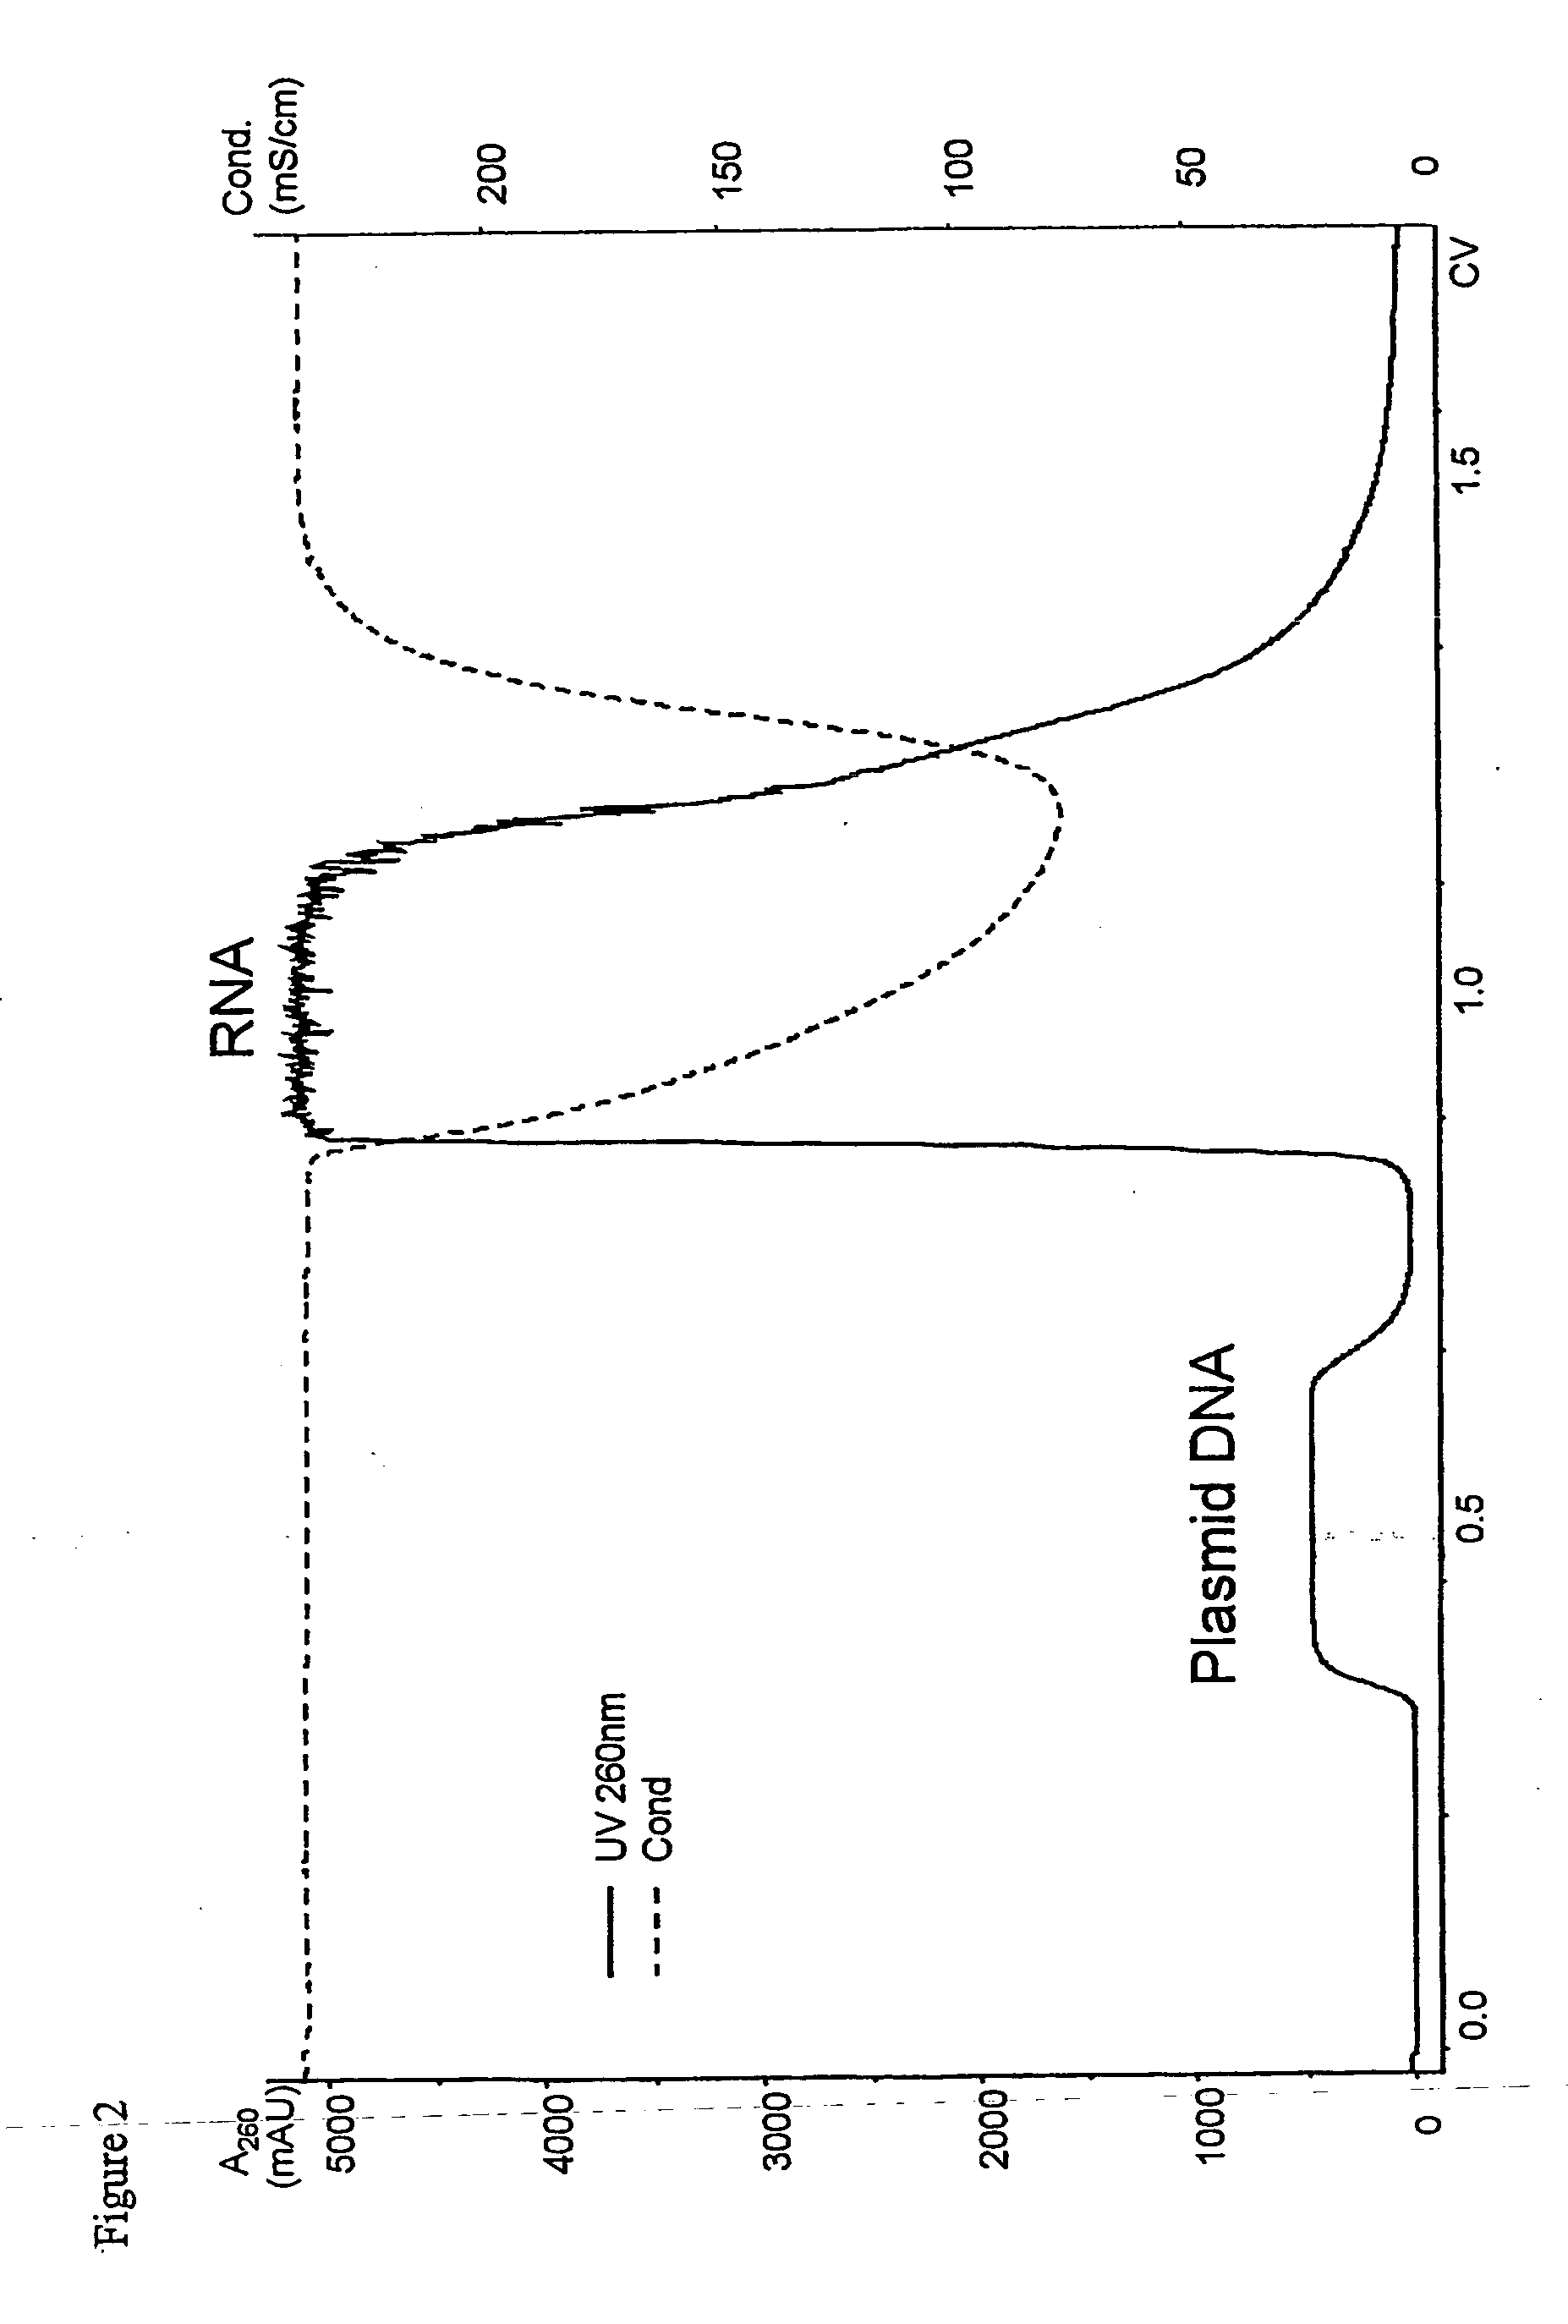 Method of separation using aromatic thioether ligands